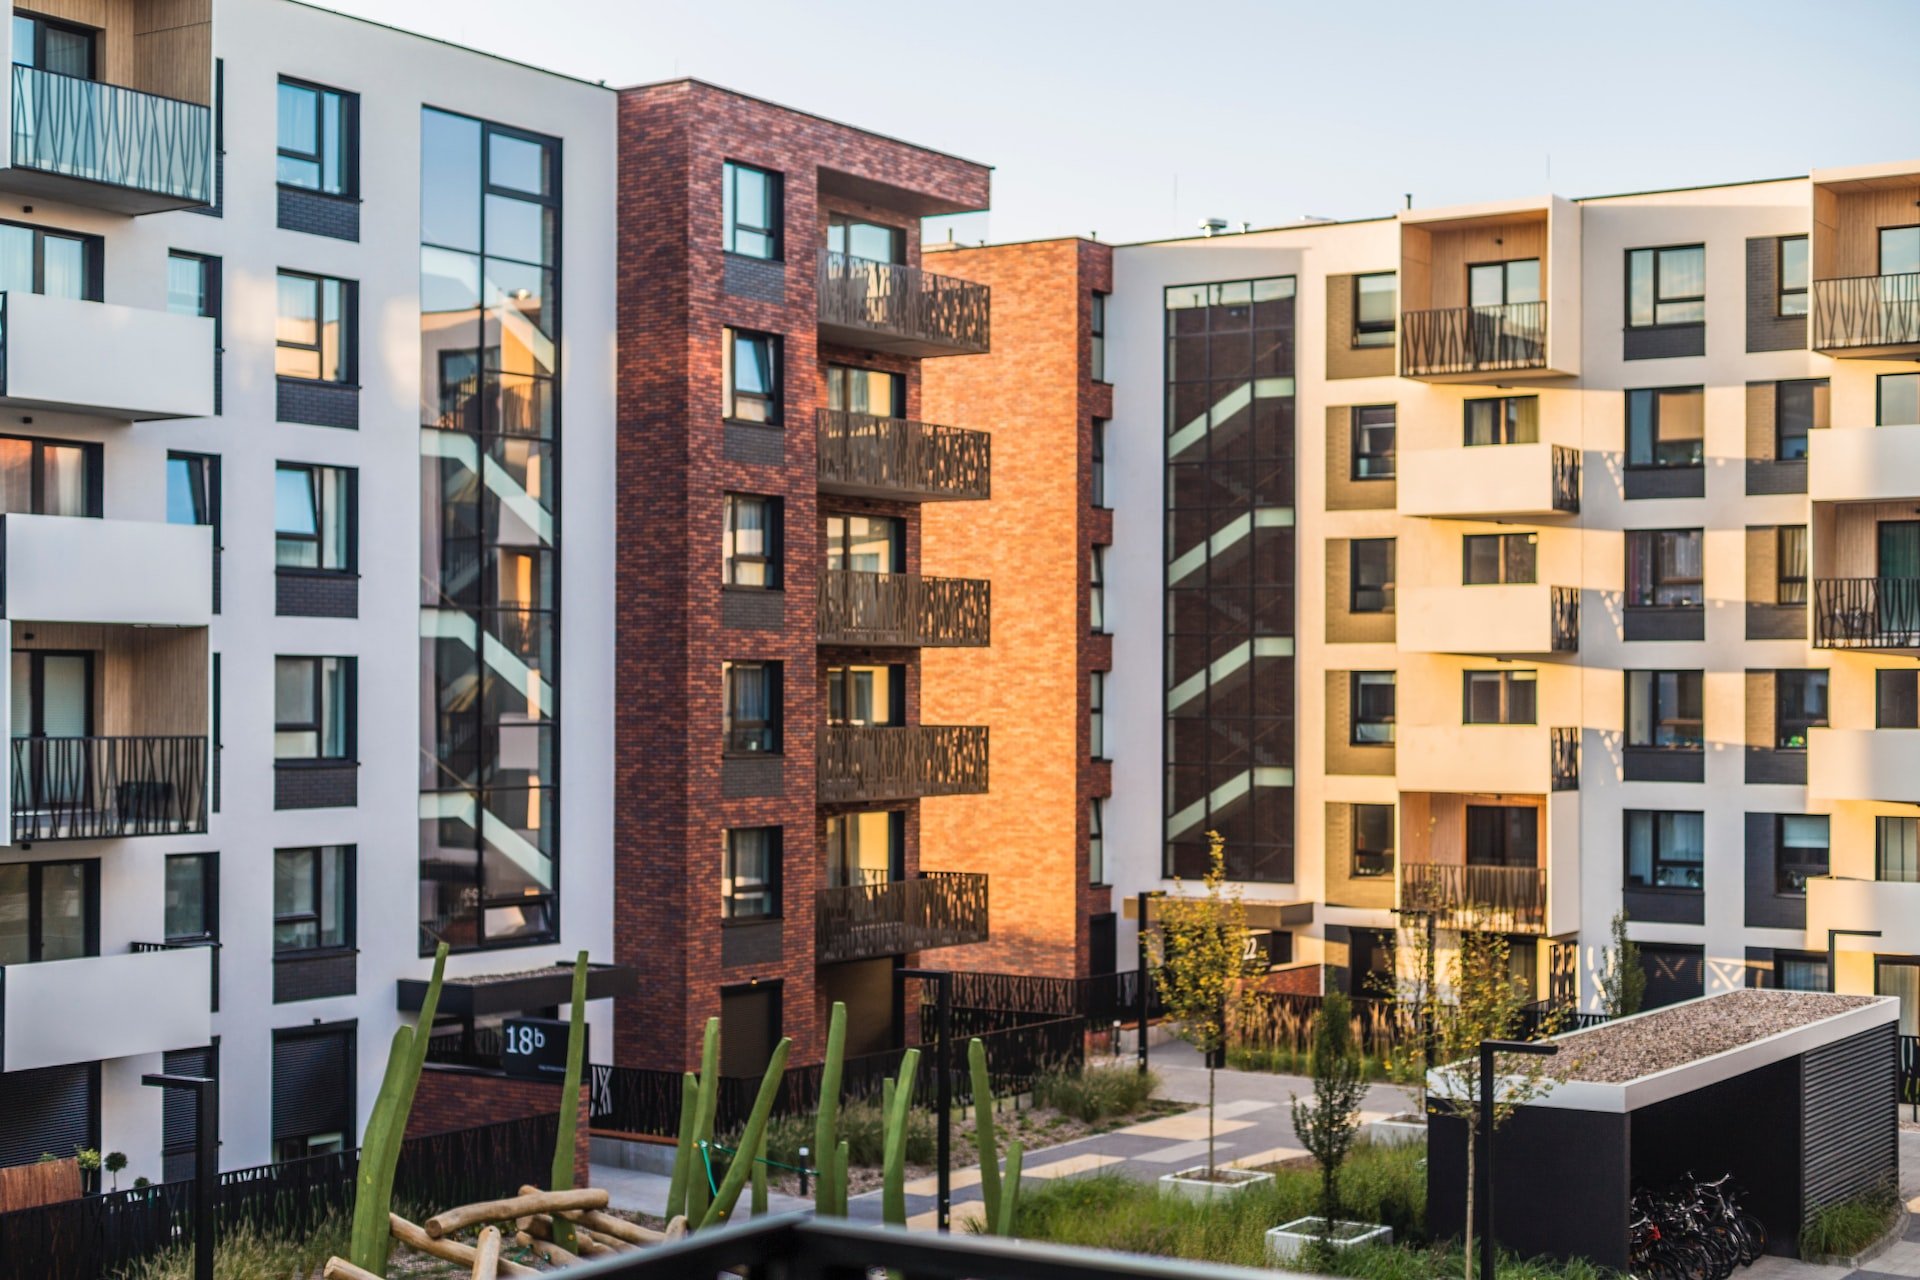 How to Buy an Apartment Complex as a First-Time Investor